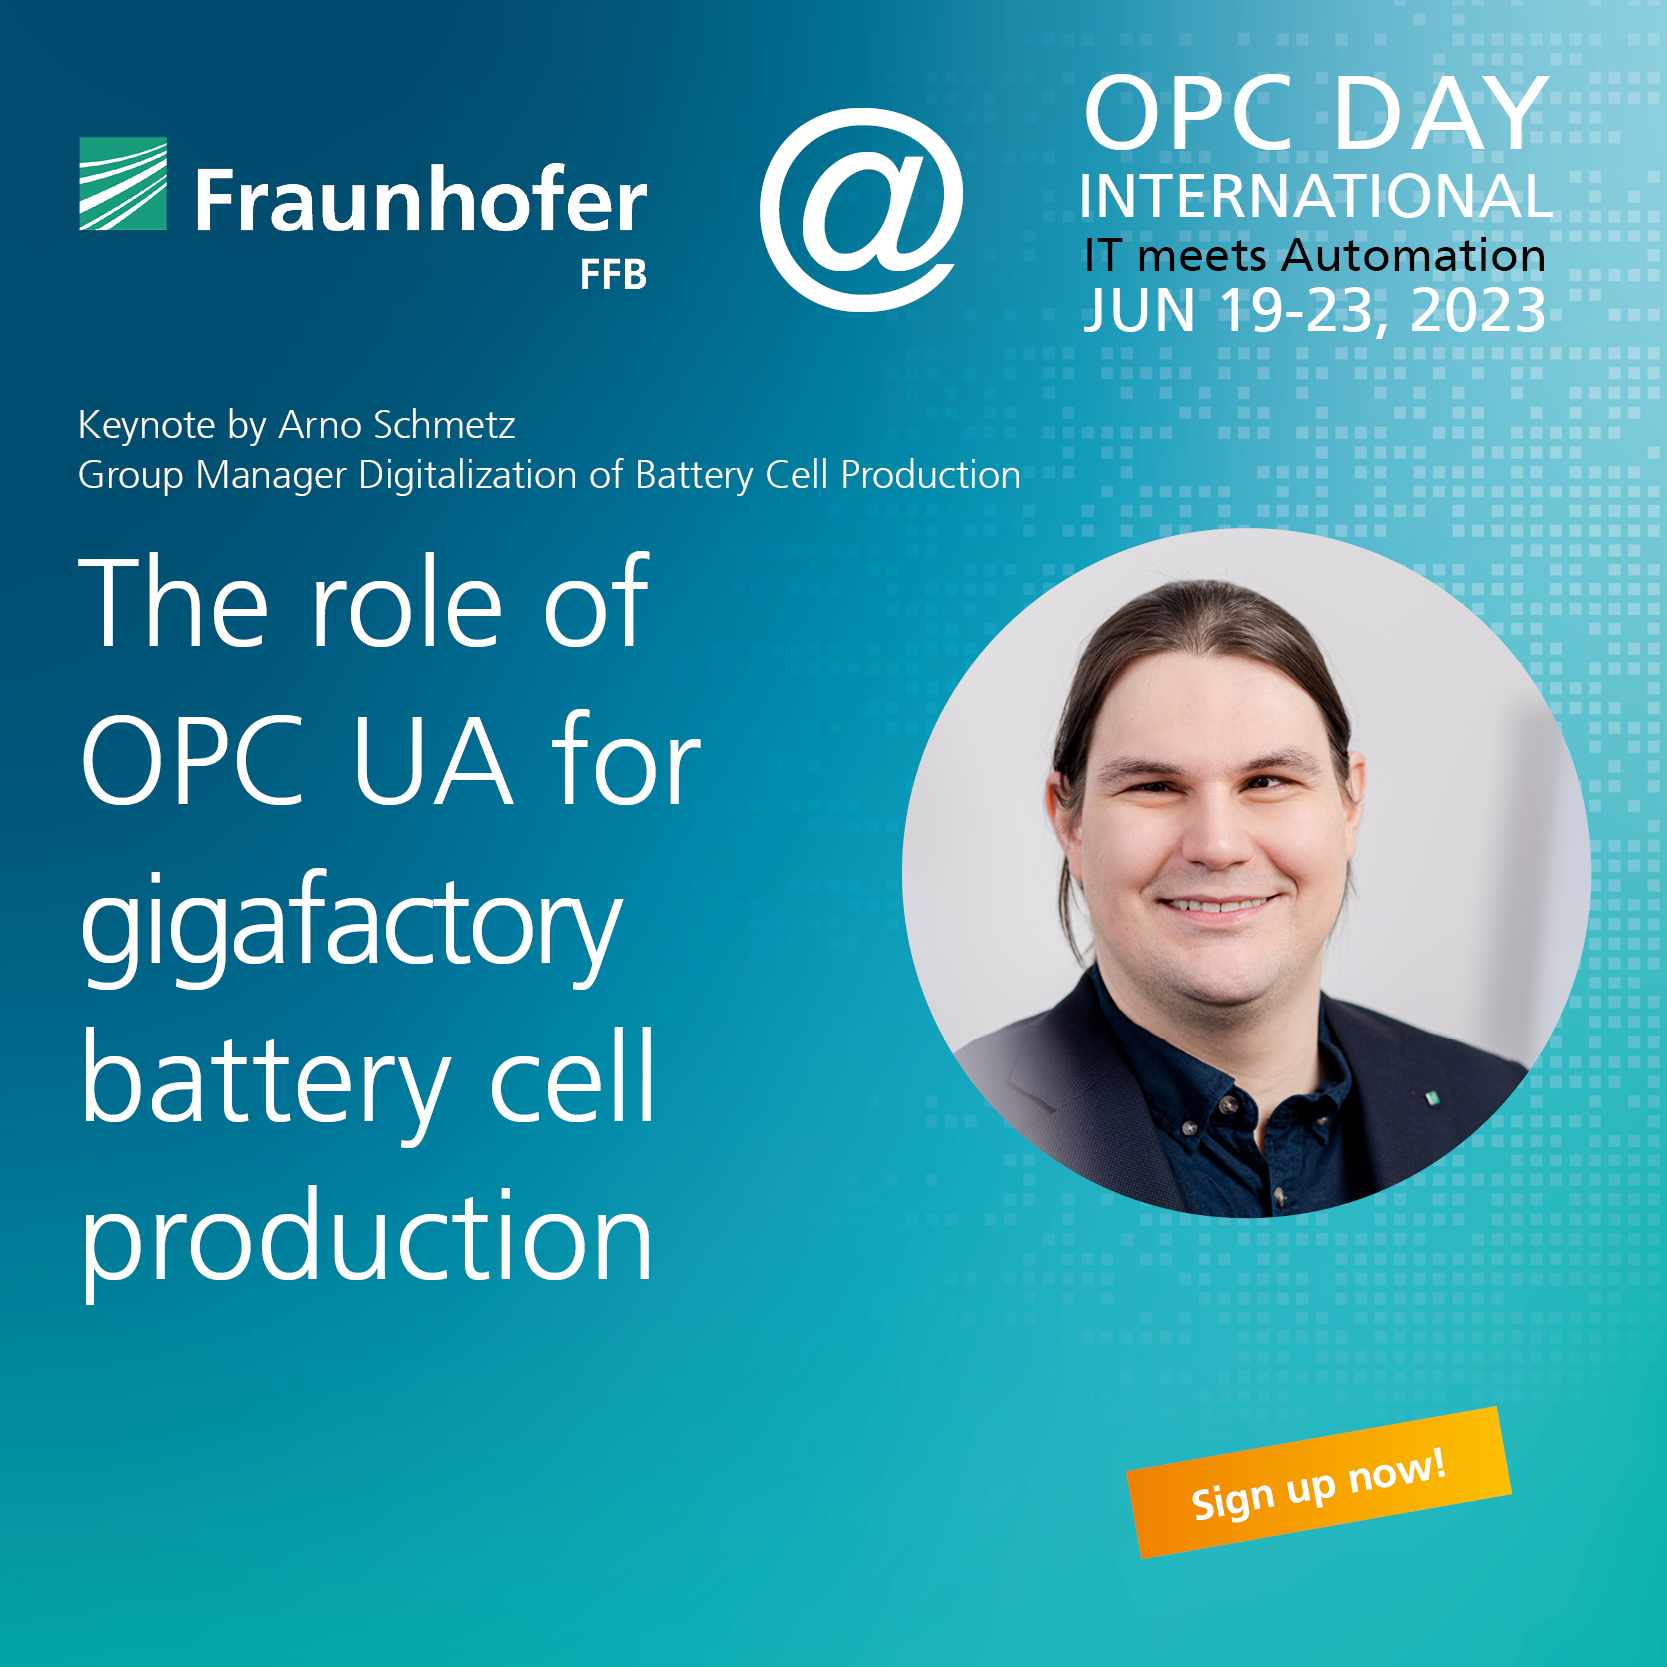 Presentation by Arno Schmetz about OPC UA in battery cell production